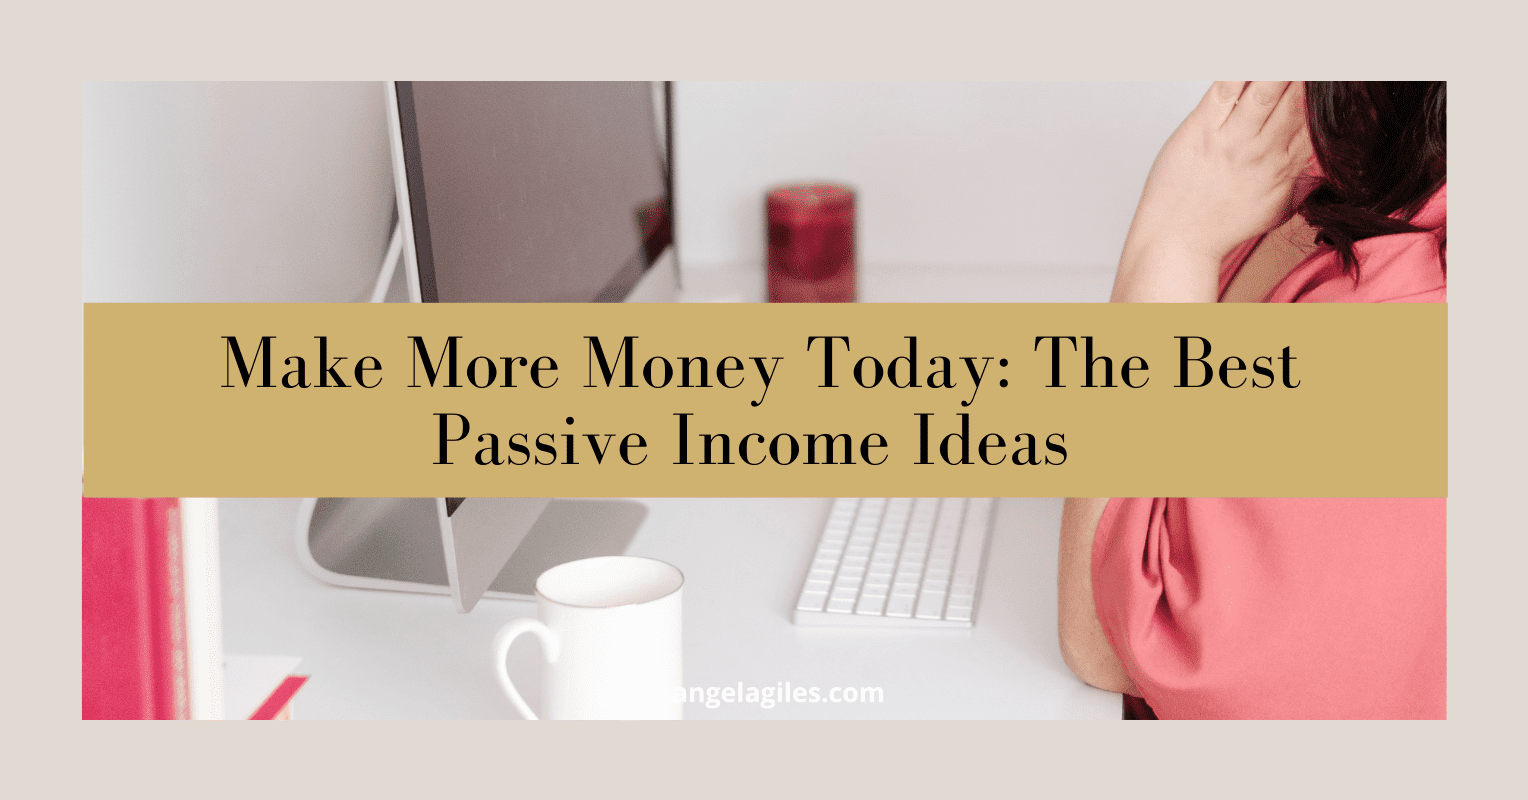 Make More Money Today: The Best Passive Income Ideas 